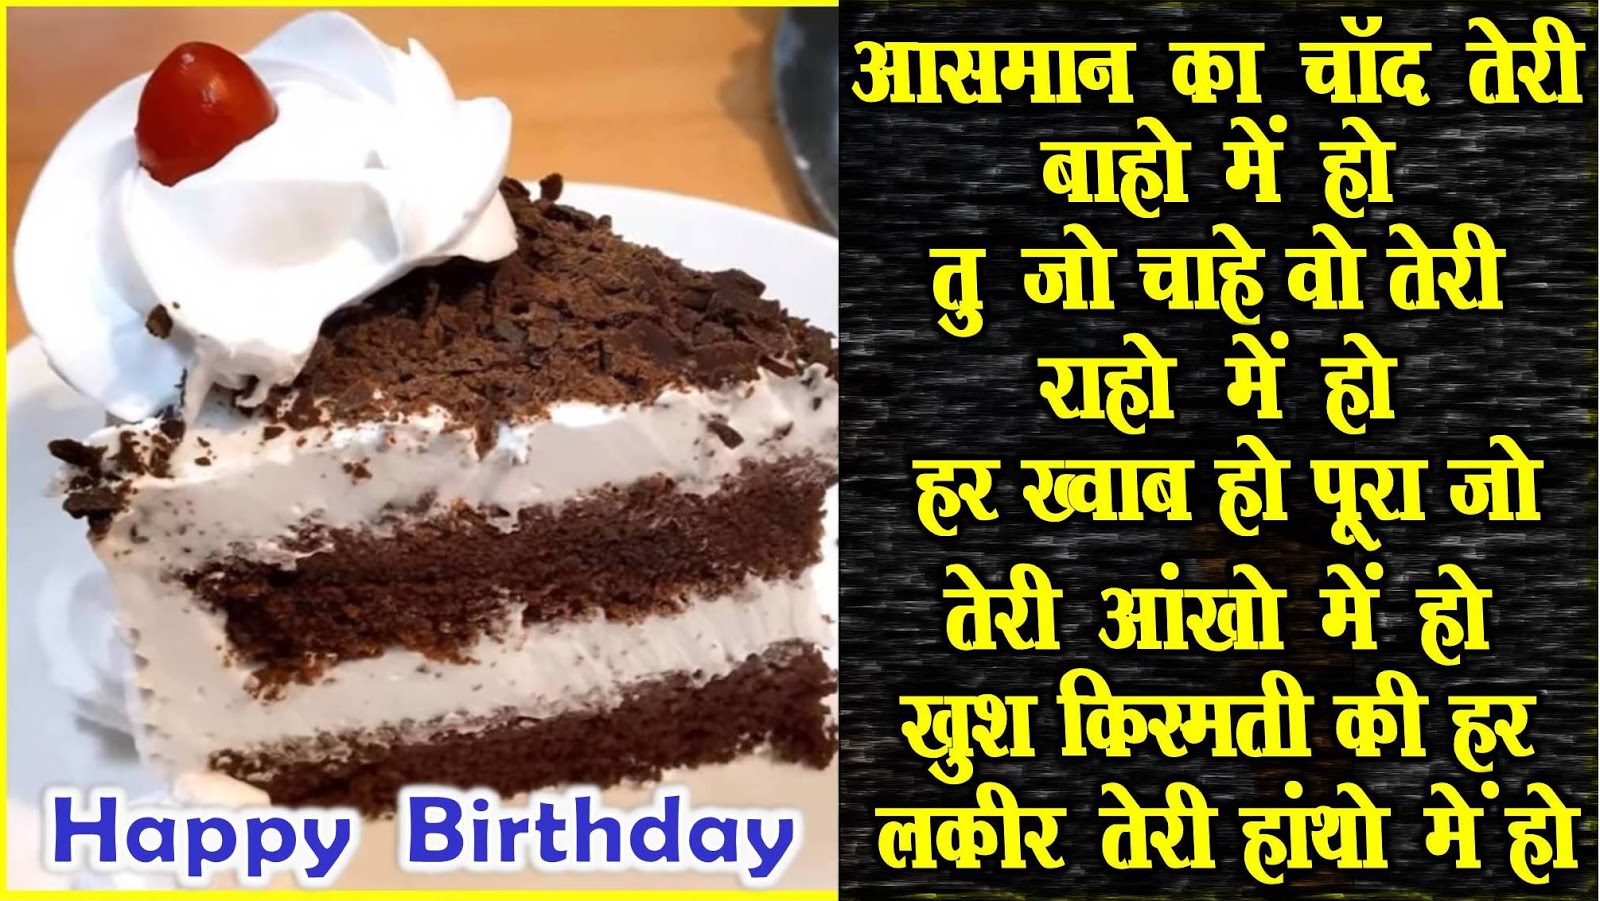 Brother Sister Friends Birthday Wishes Status In Hindi